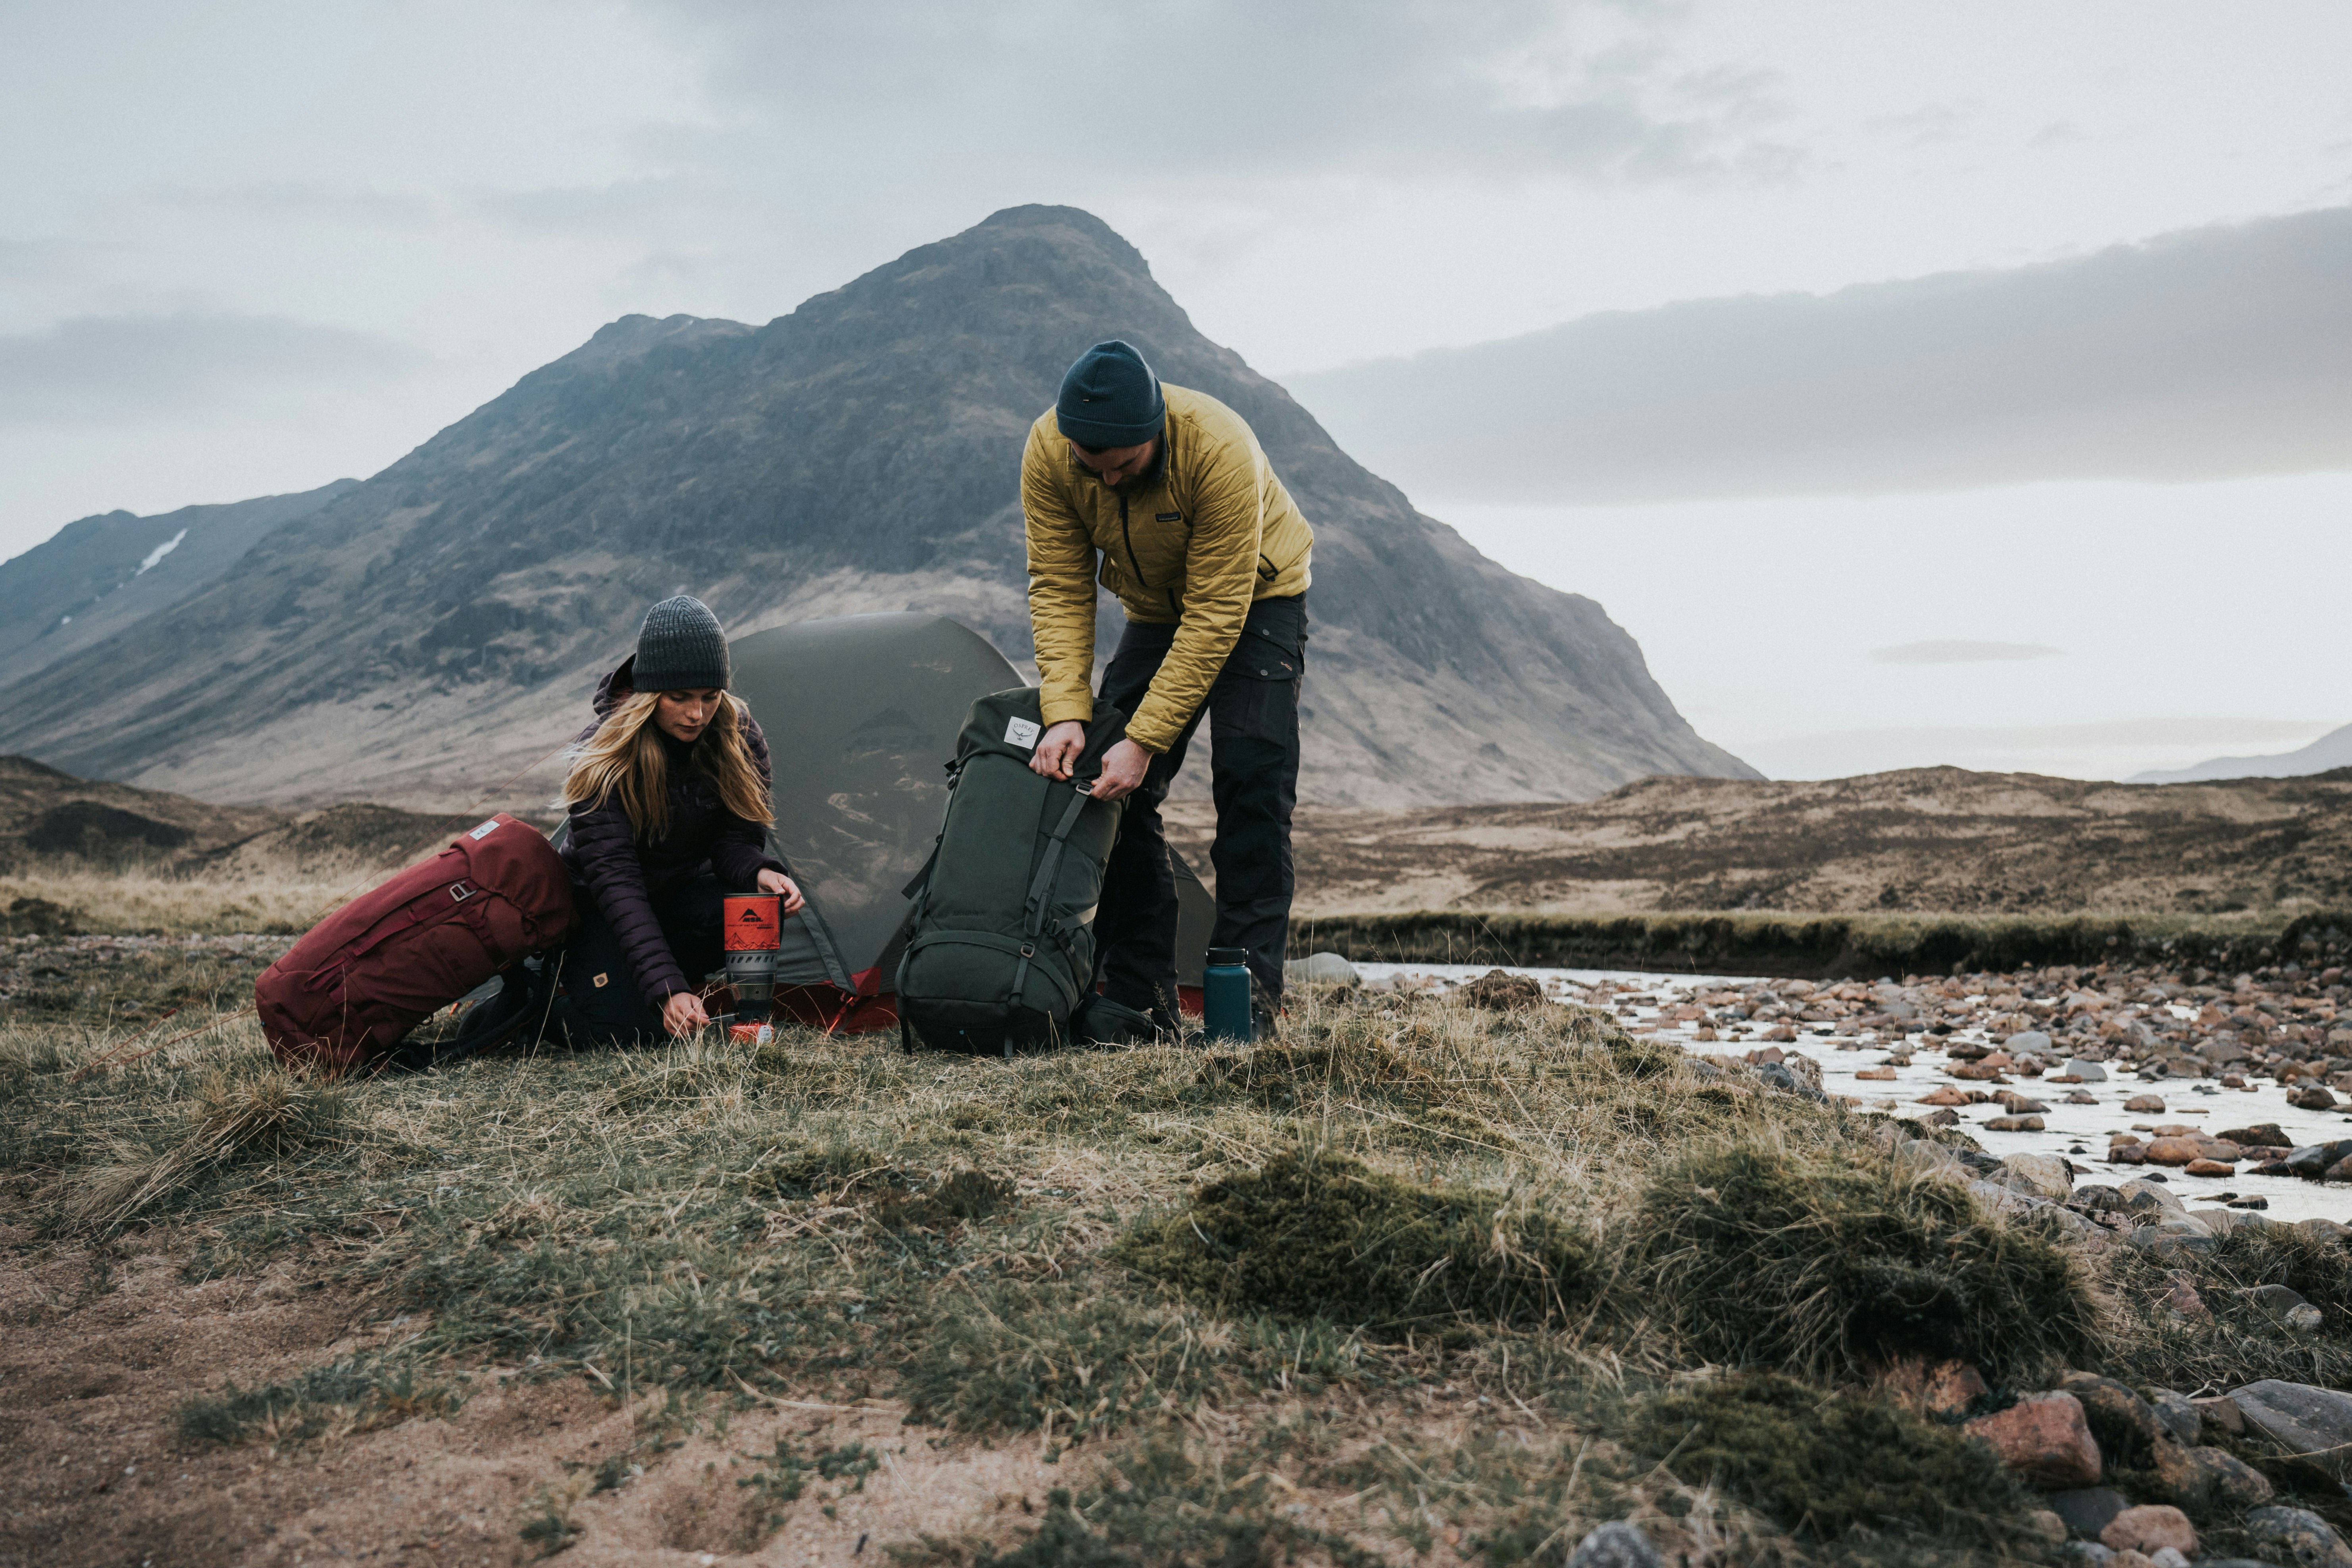 A man and woman unpack equipment from backpacks in a natural area